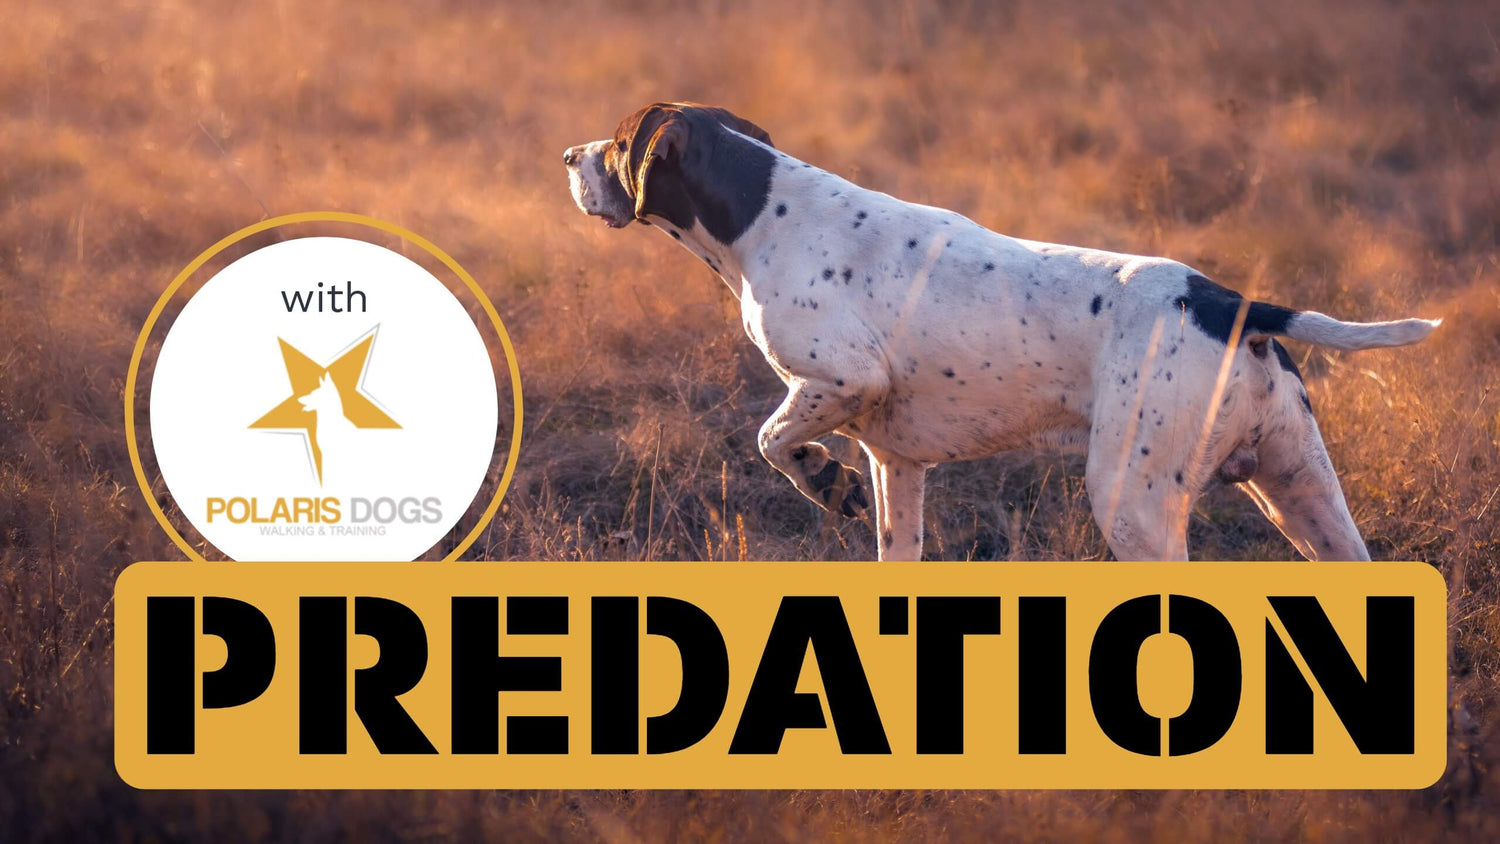 A hunting dog standing on dry gras starring into the distance and a box with text “Predation”